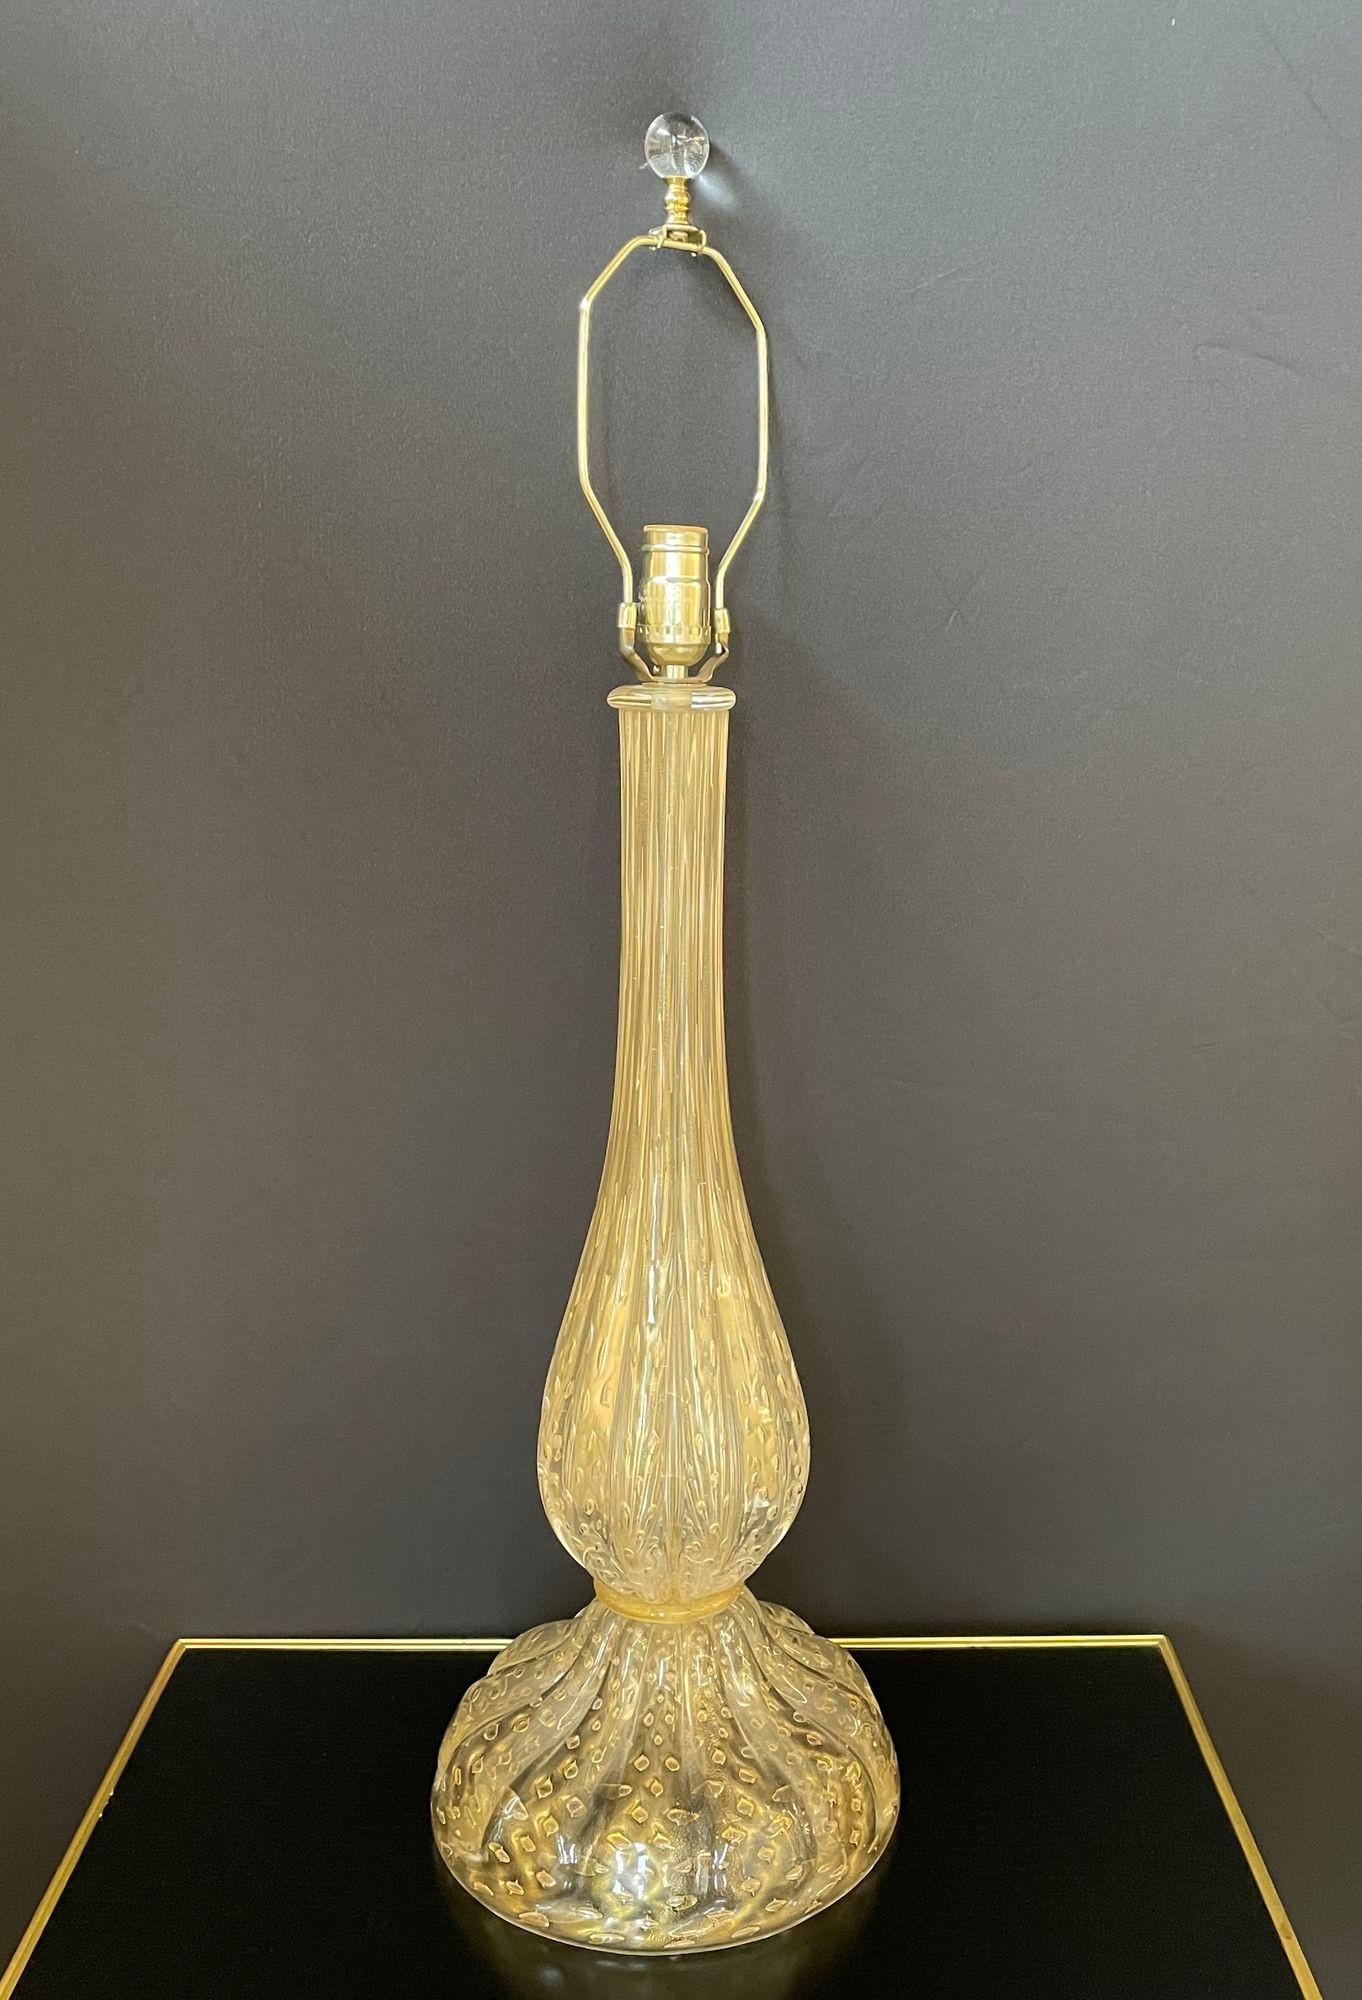 Large Italian Murano Glass Table Lamp, Mid-Century Modern, Barovier Toso Style
 
Handblown Murano glass table lamp having a speckled interior and a textured exterior.
 
Murano Glass
Italy, 1940s
 
24.5